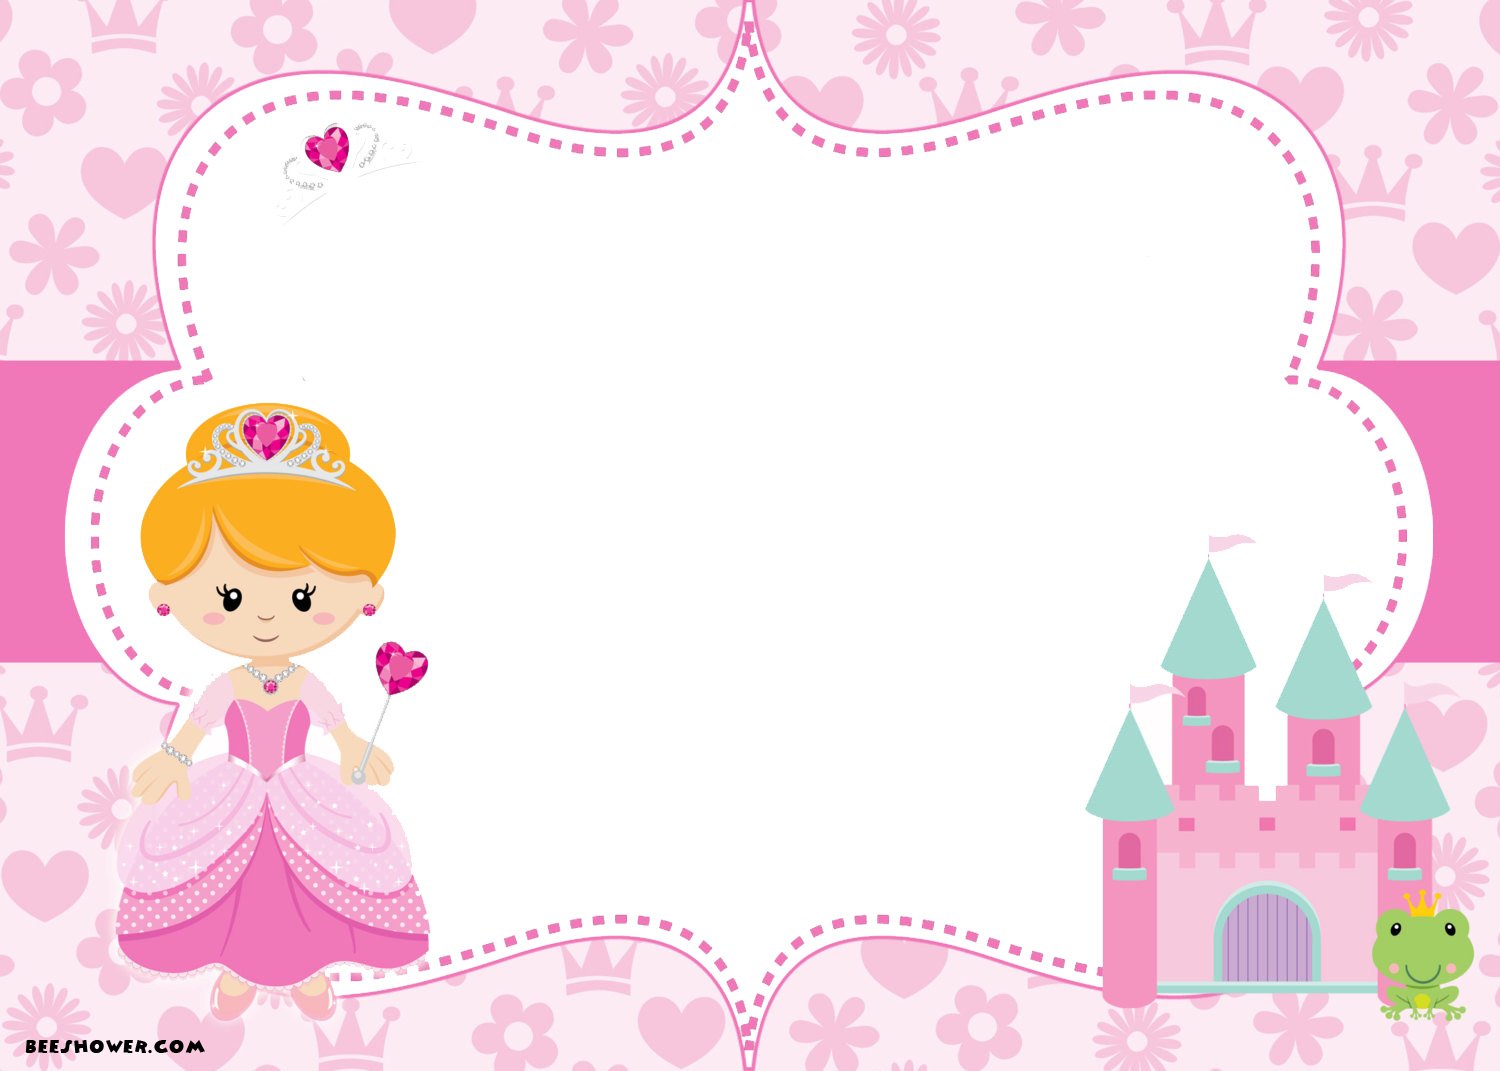 princess-themed-baby-shower-ideas-free-printable-baby-shower-invitations-templates